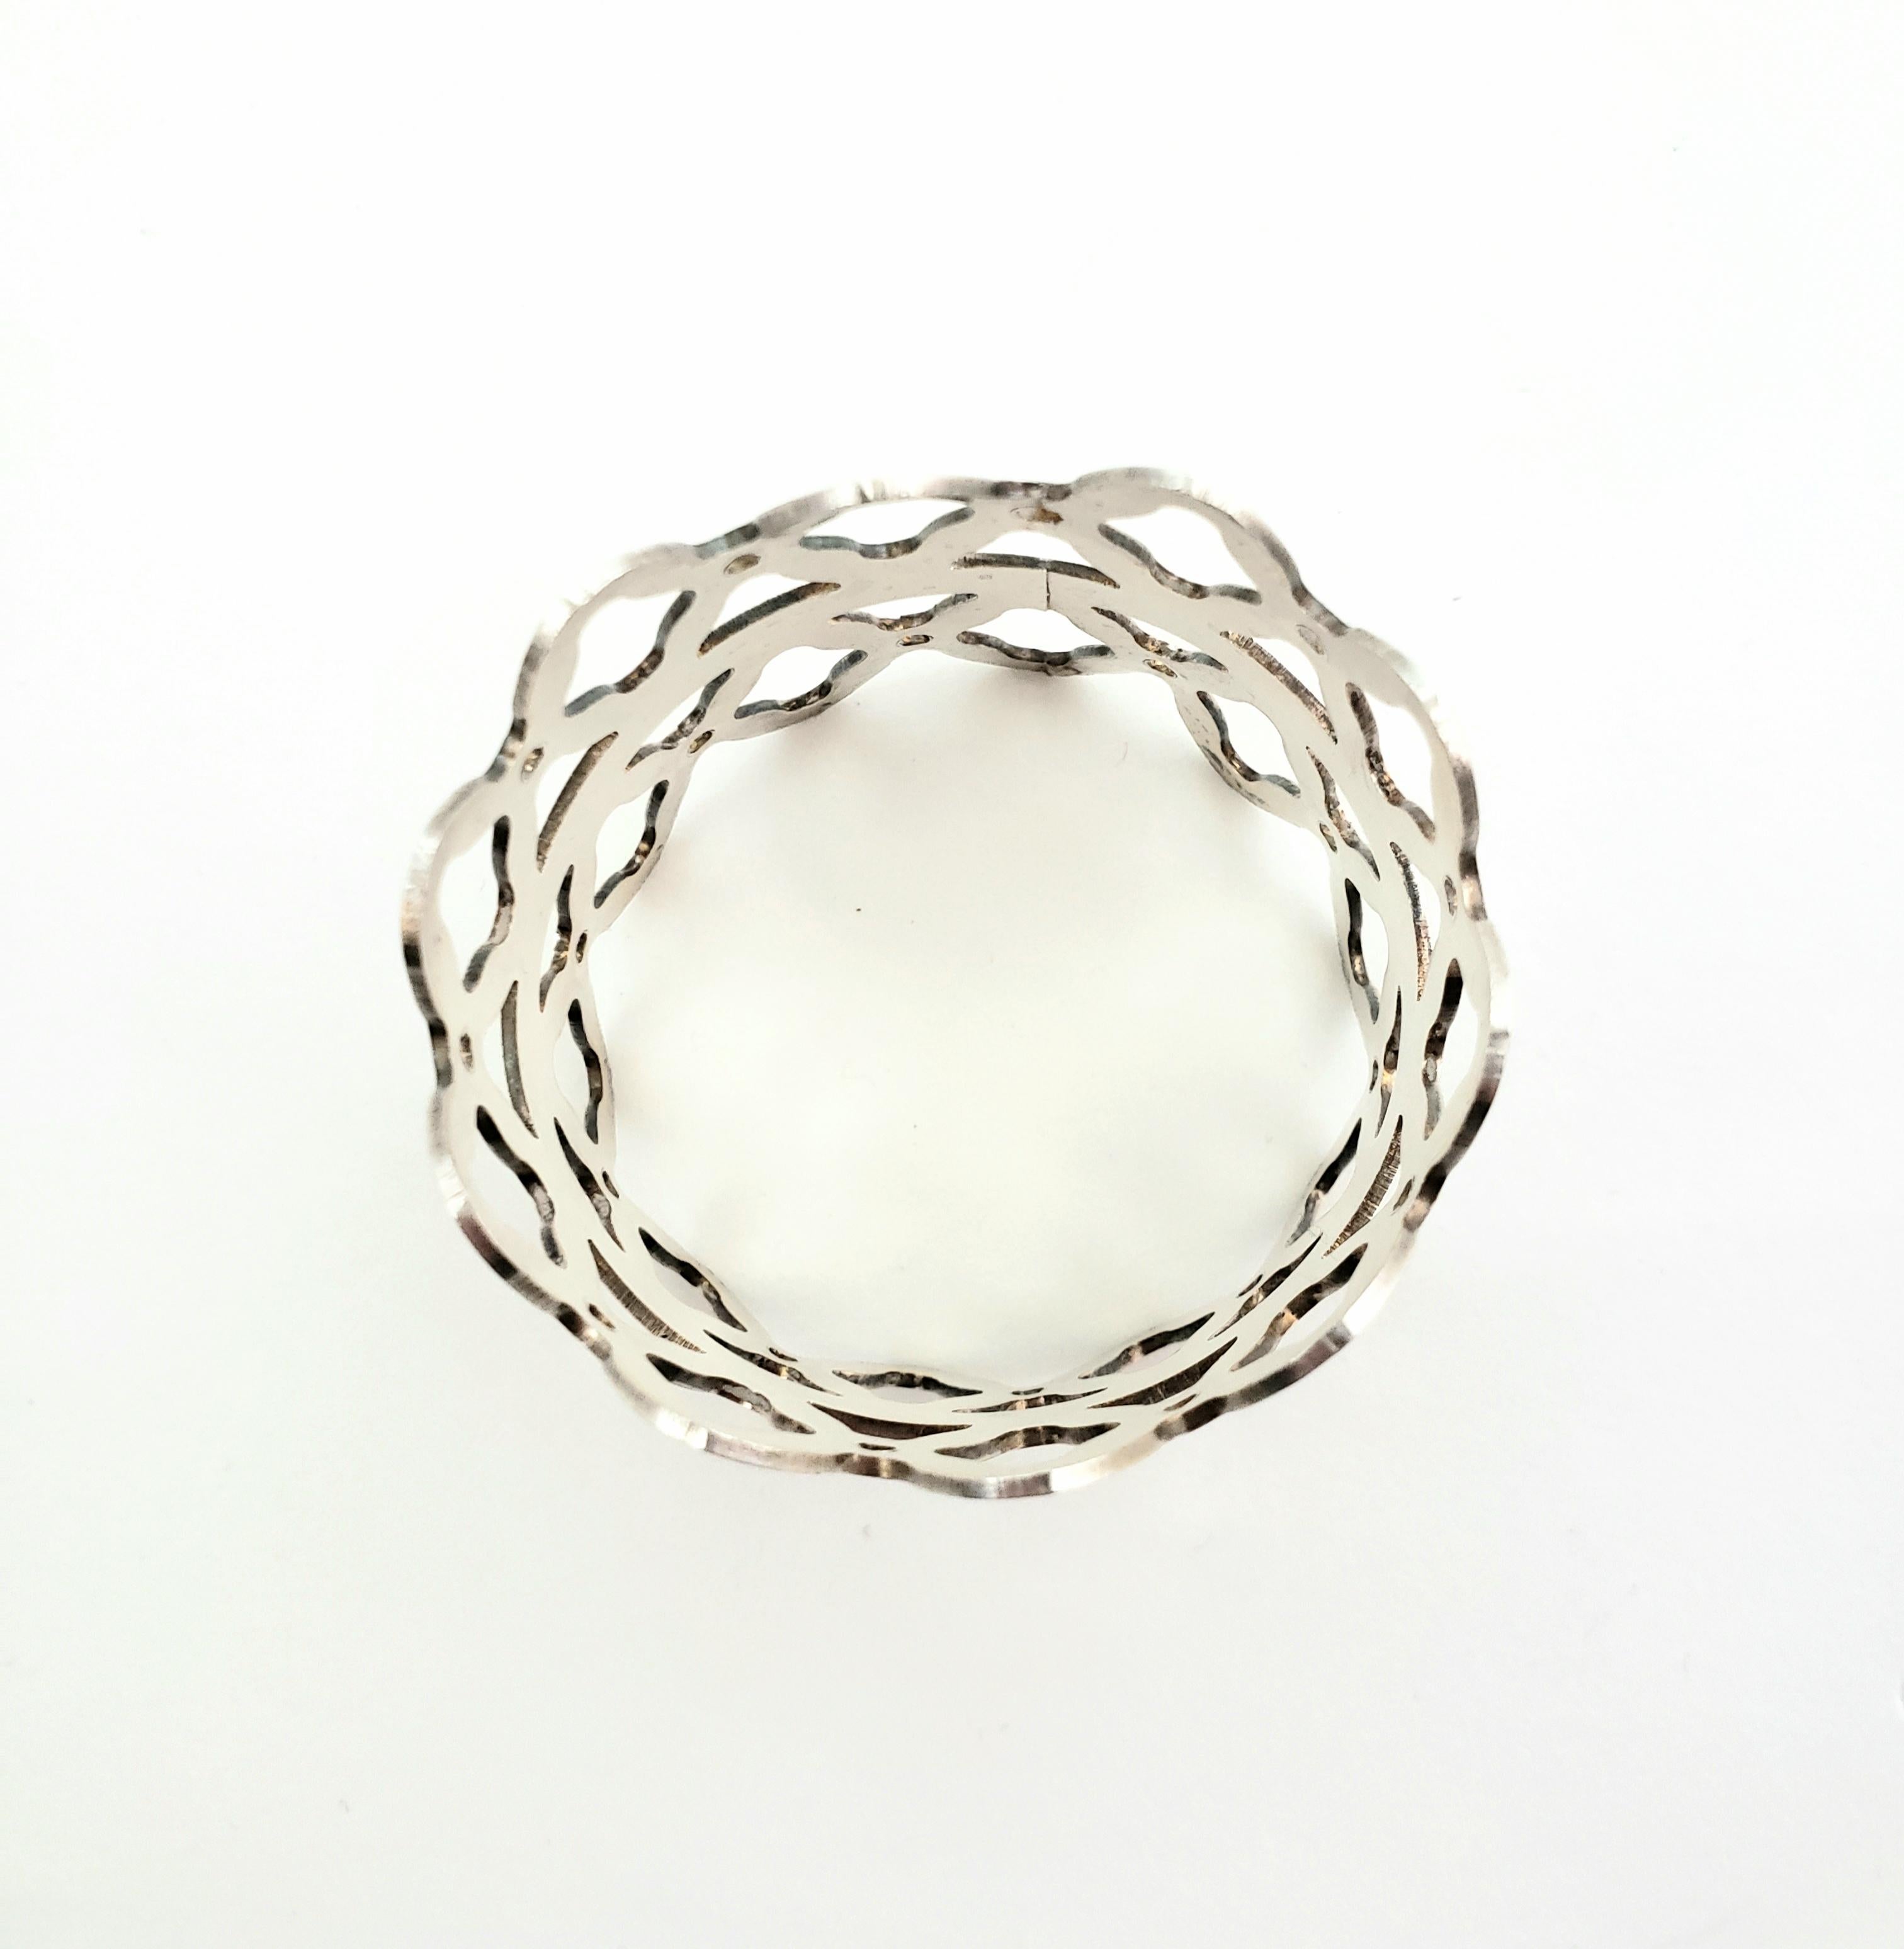 Denmark 936 Sterling Silver Napkin Ring

This is a lovely Denmark sterling silver napkin ring.

Measurements:     Napkin rings measures 1 and 1/2 inches in diameter;  5 and 1/2 inches in circumference, and 1 and 1/2 inches in height .

Weight:  22.5